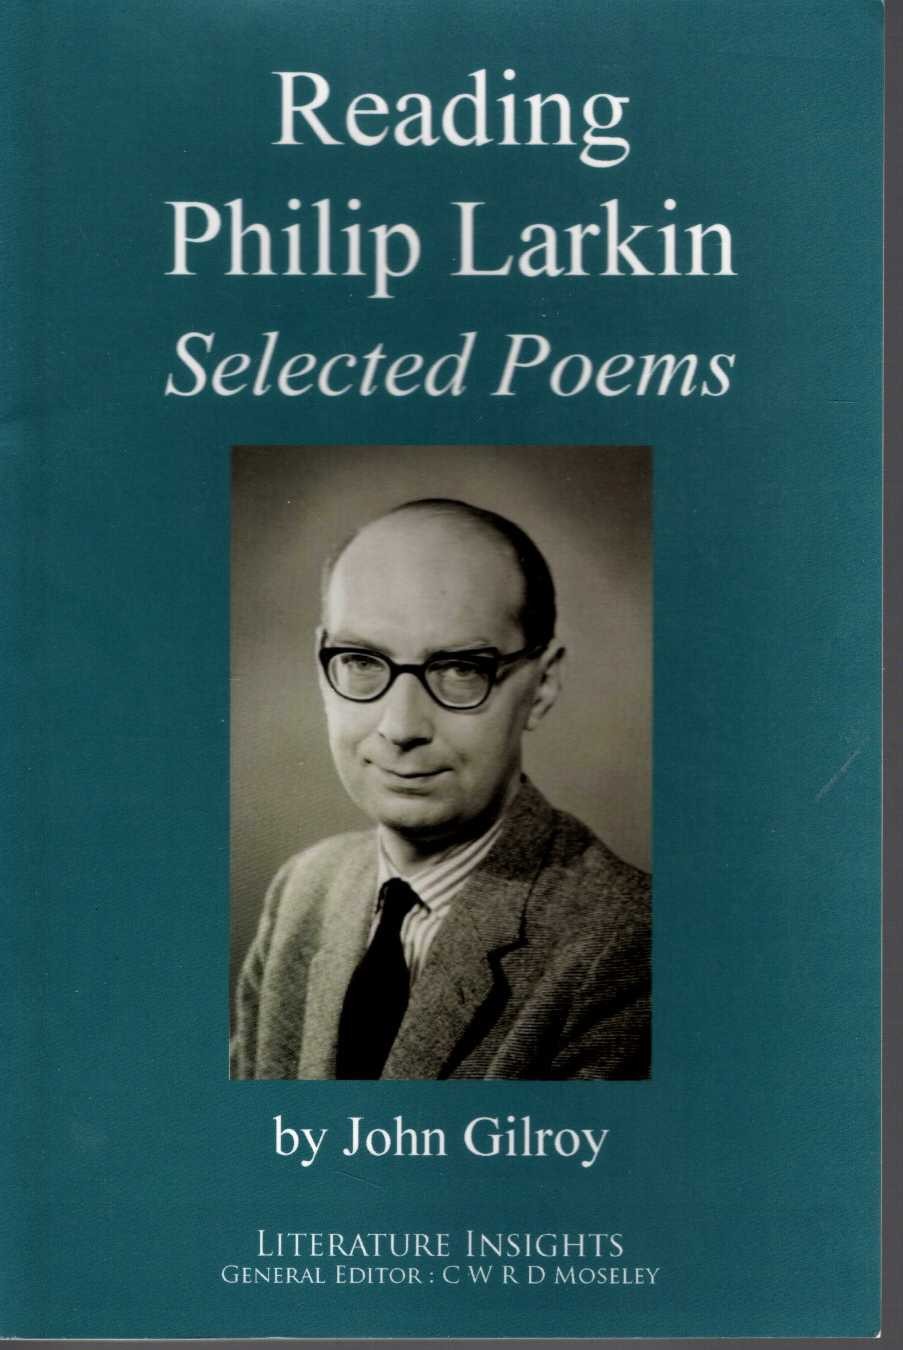 John Gilroy  READING PHILIP LARKIN: SELECTED POEMS front book cover image